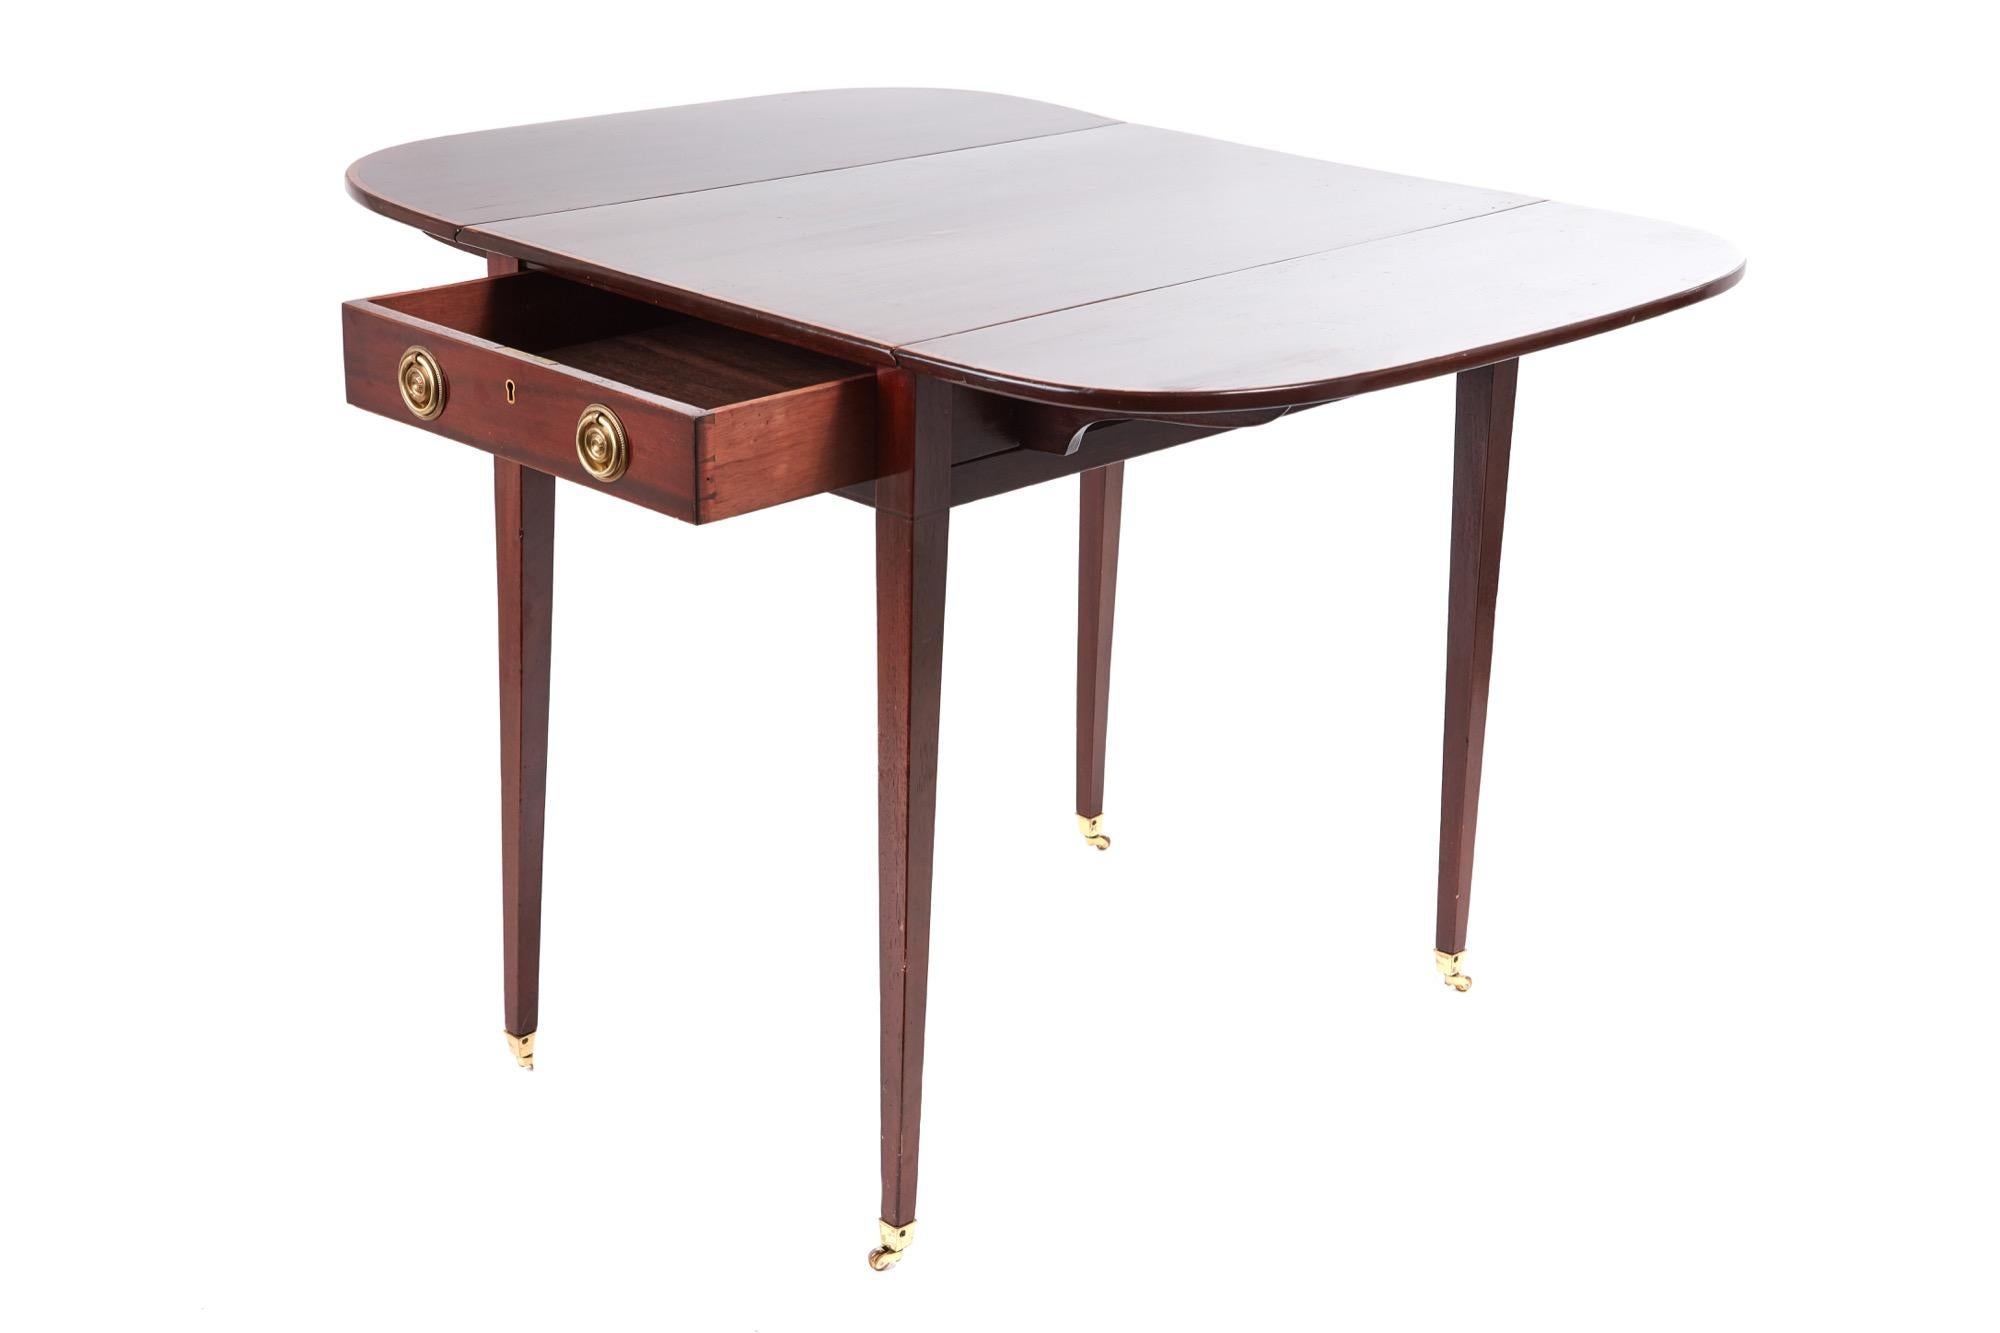 Georgian antique mahogany Pembroke table with a beautiful mahogany top, two drop leaves, crossbanded in satinwood, one frieze drawer with original brass handles, standing on four elegant square tapering legs with original brass castors.

 